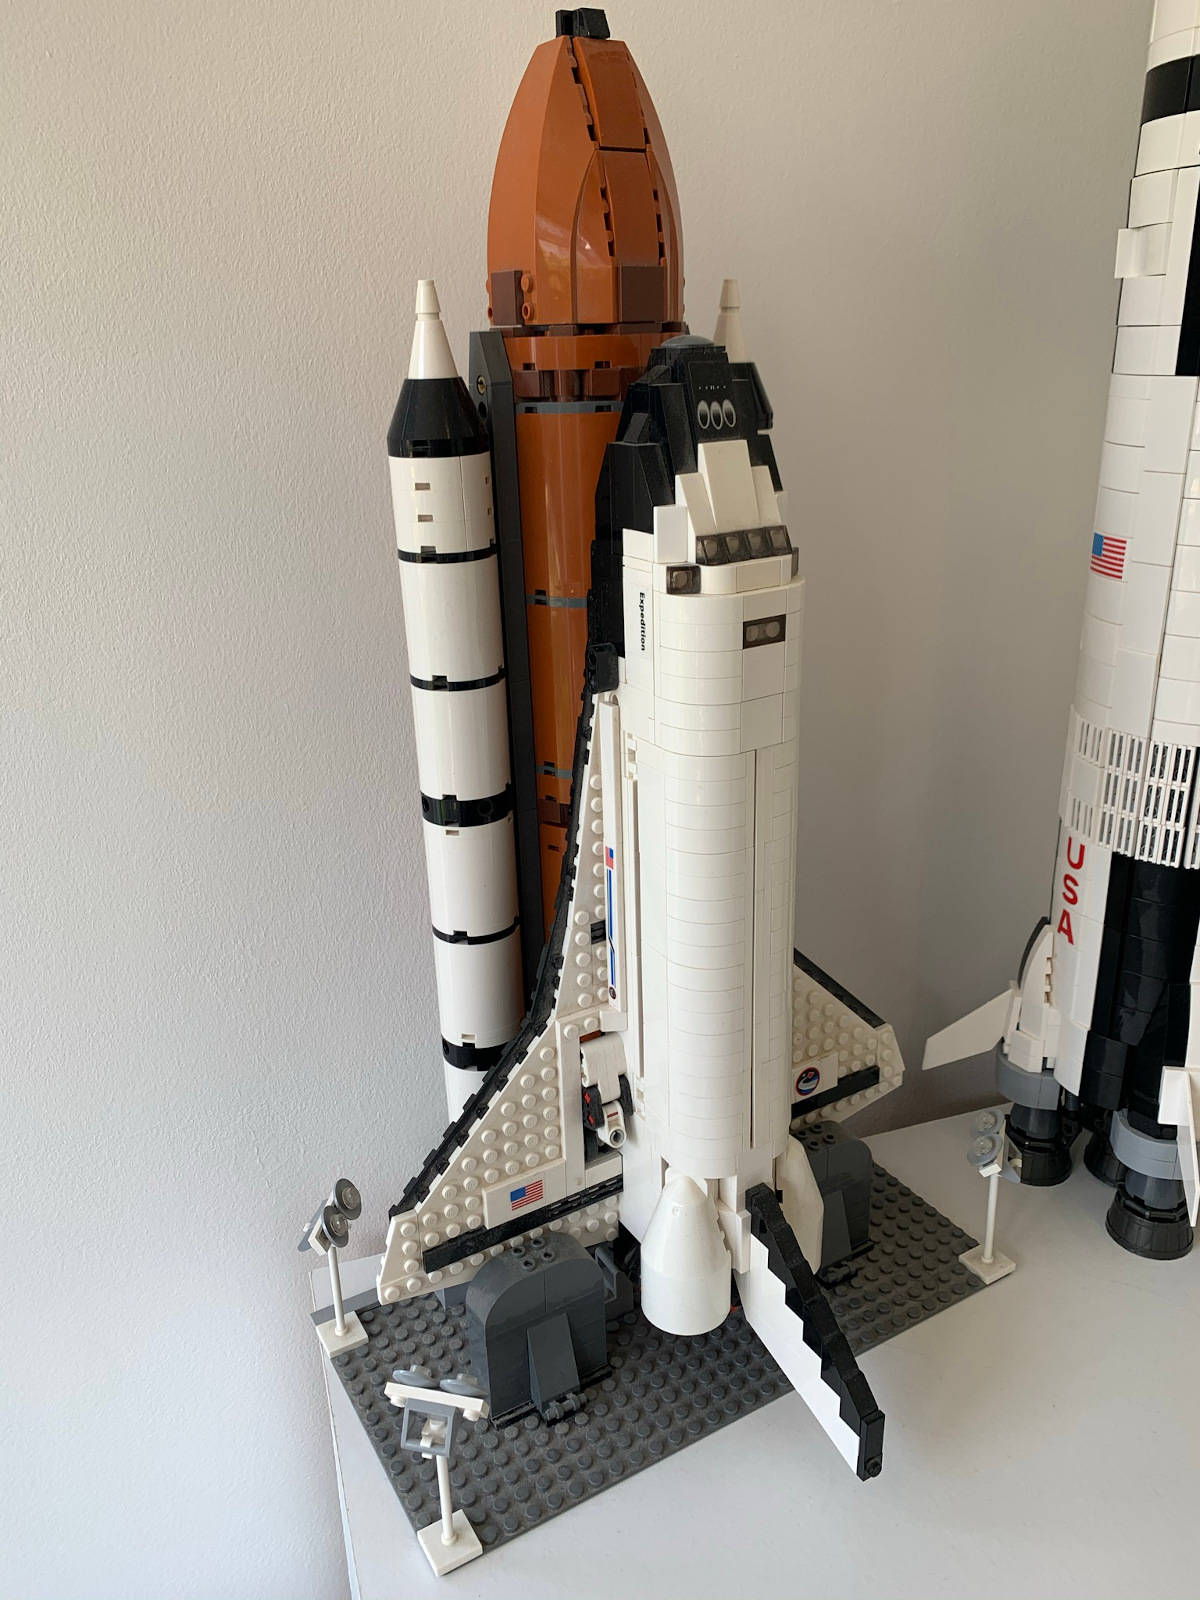 lego space shuttle discovery missing pieces